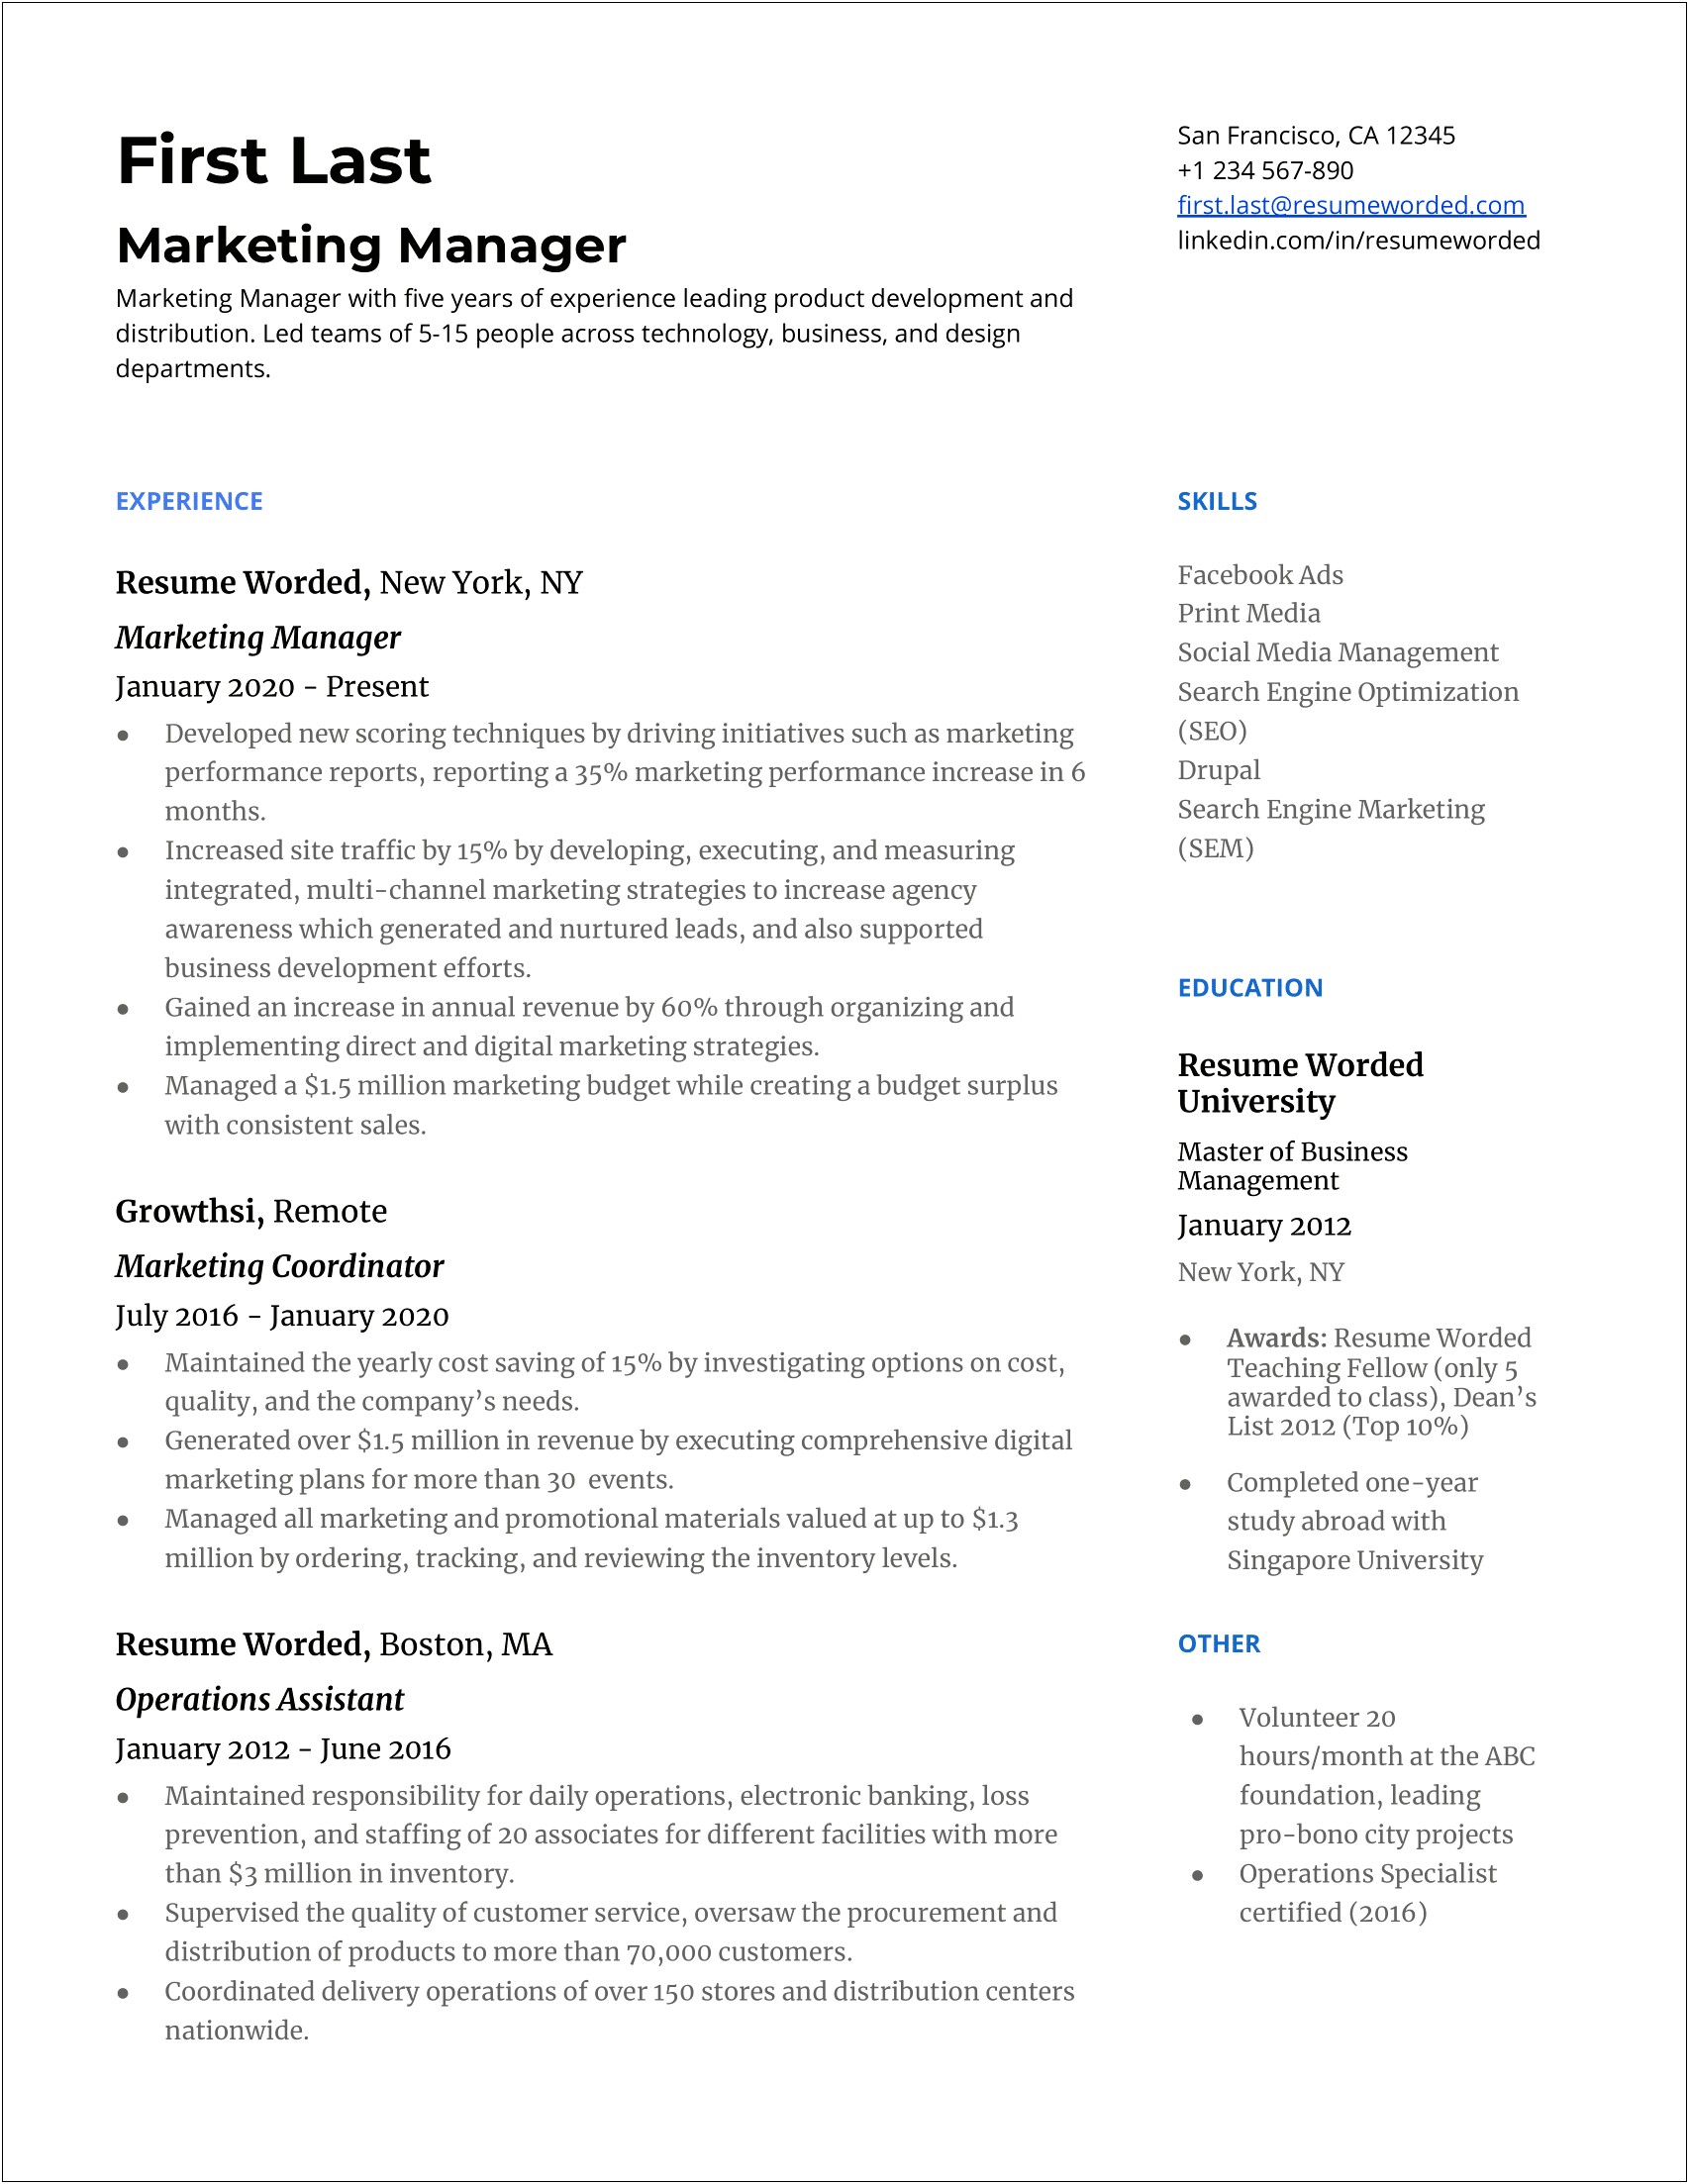 Achievement Points On Case Manager Resume Examples